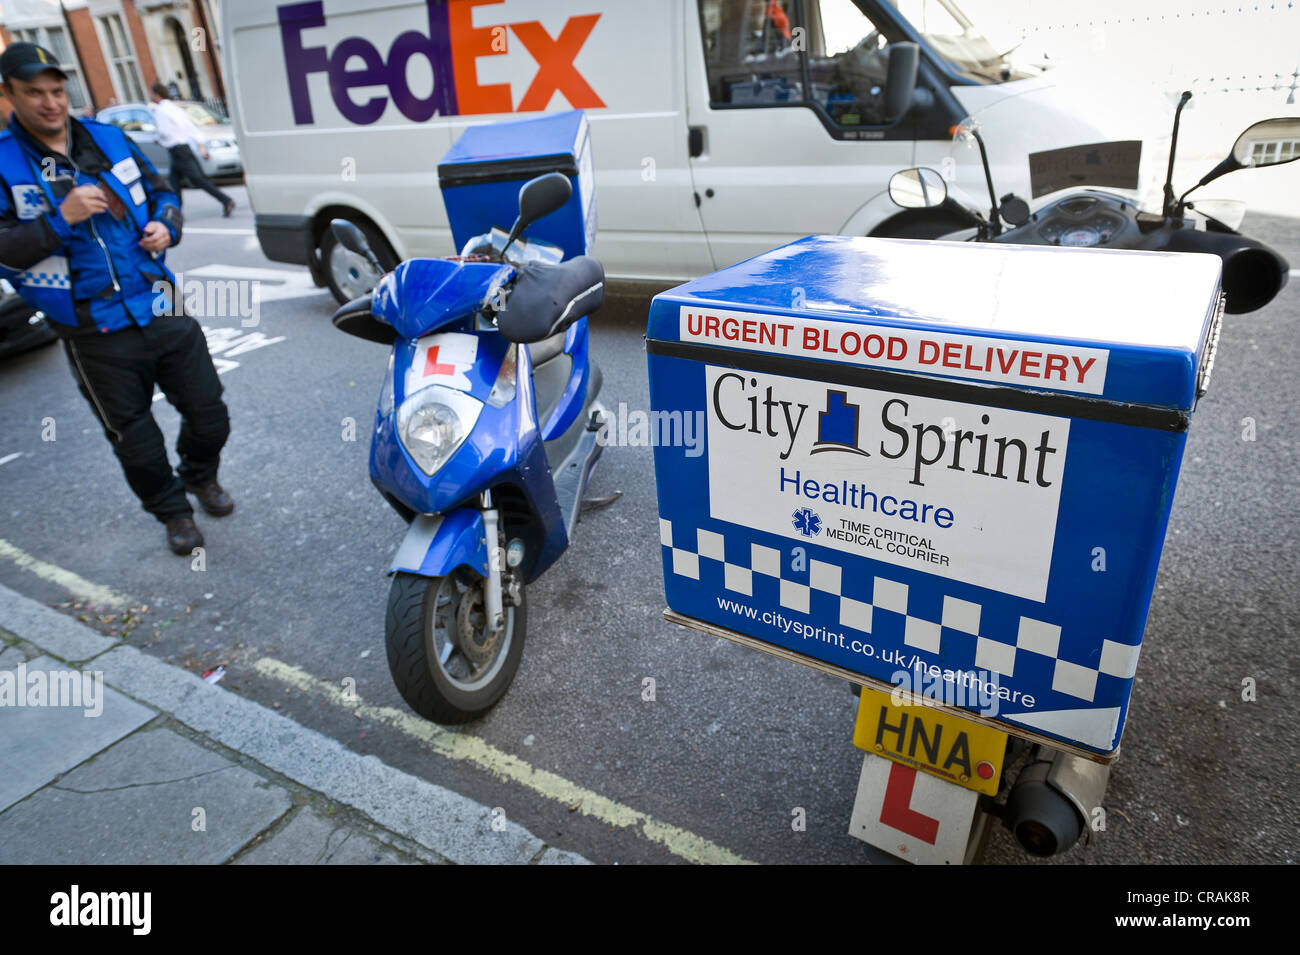 Fed-Ex driver, motorcycle with container for blood units, Marylebone, London, England, United Kingdom, Europe Stock Photo